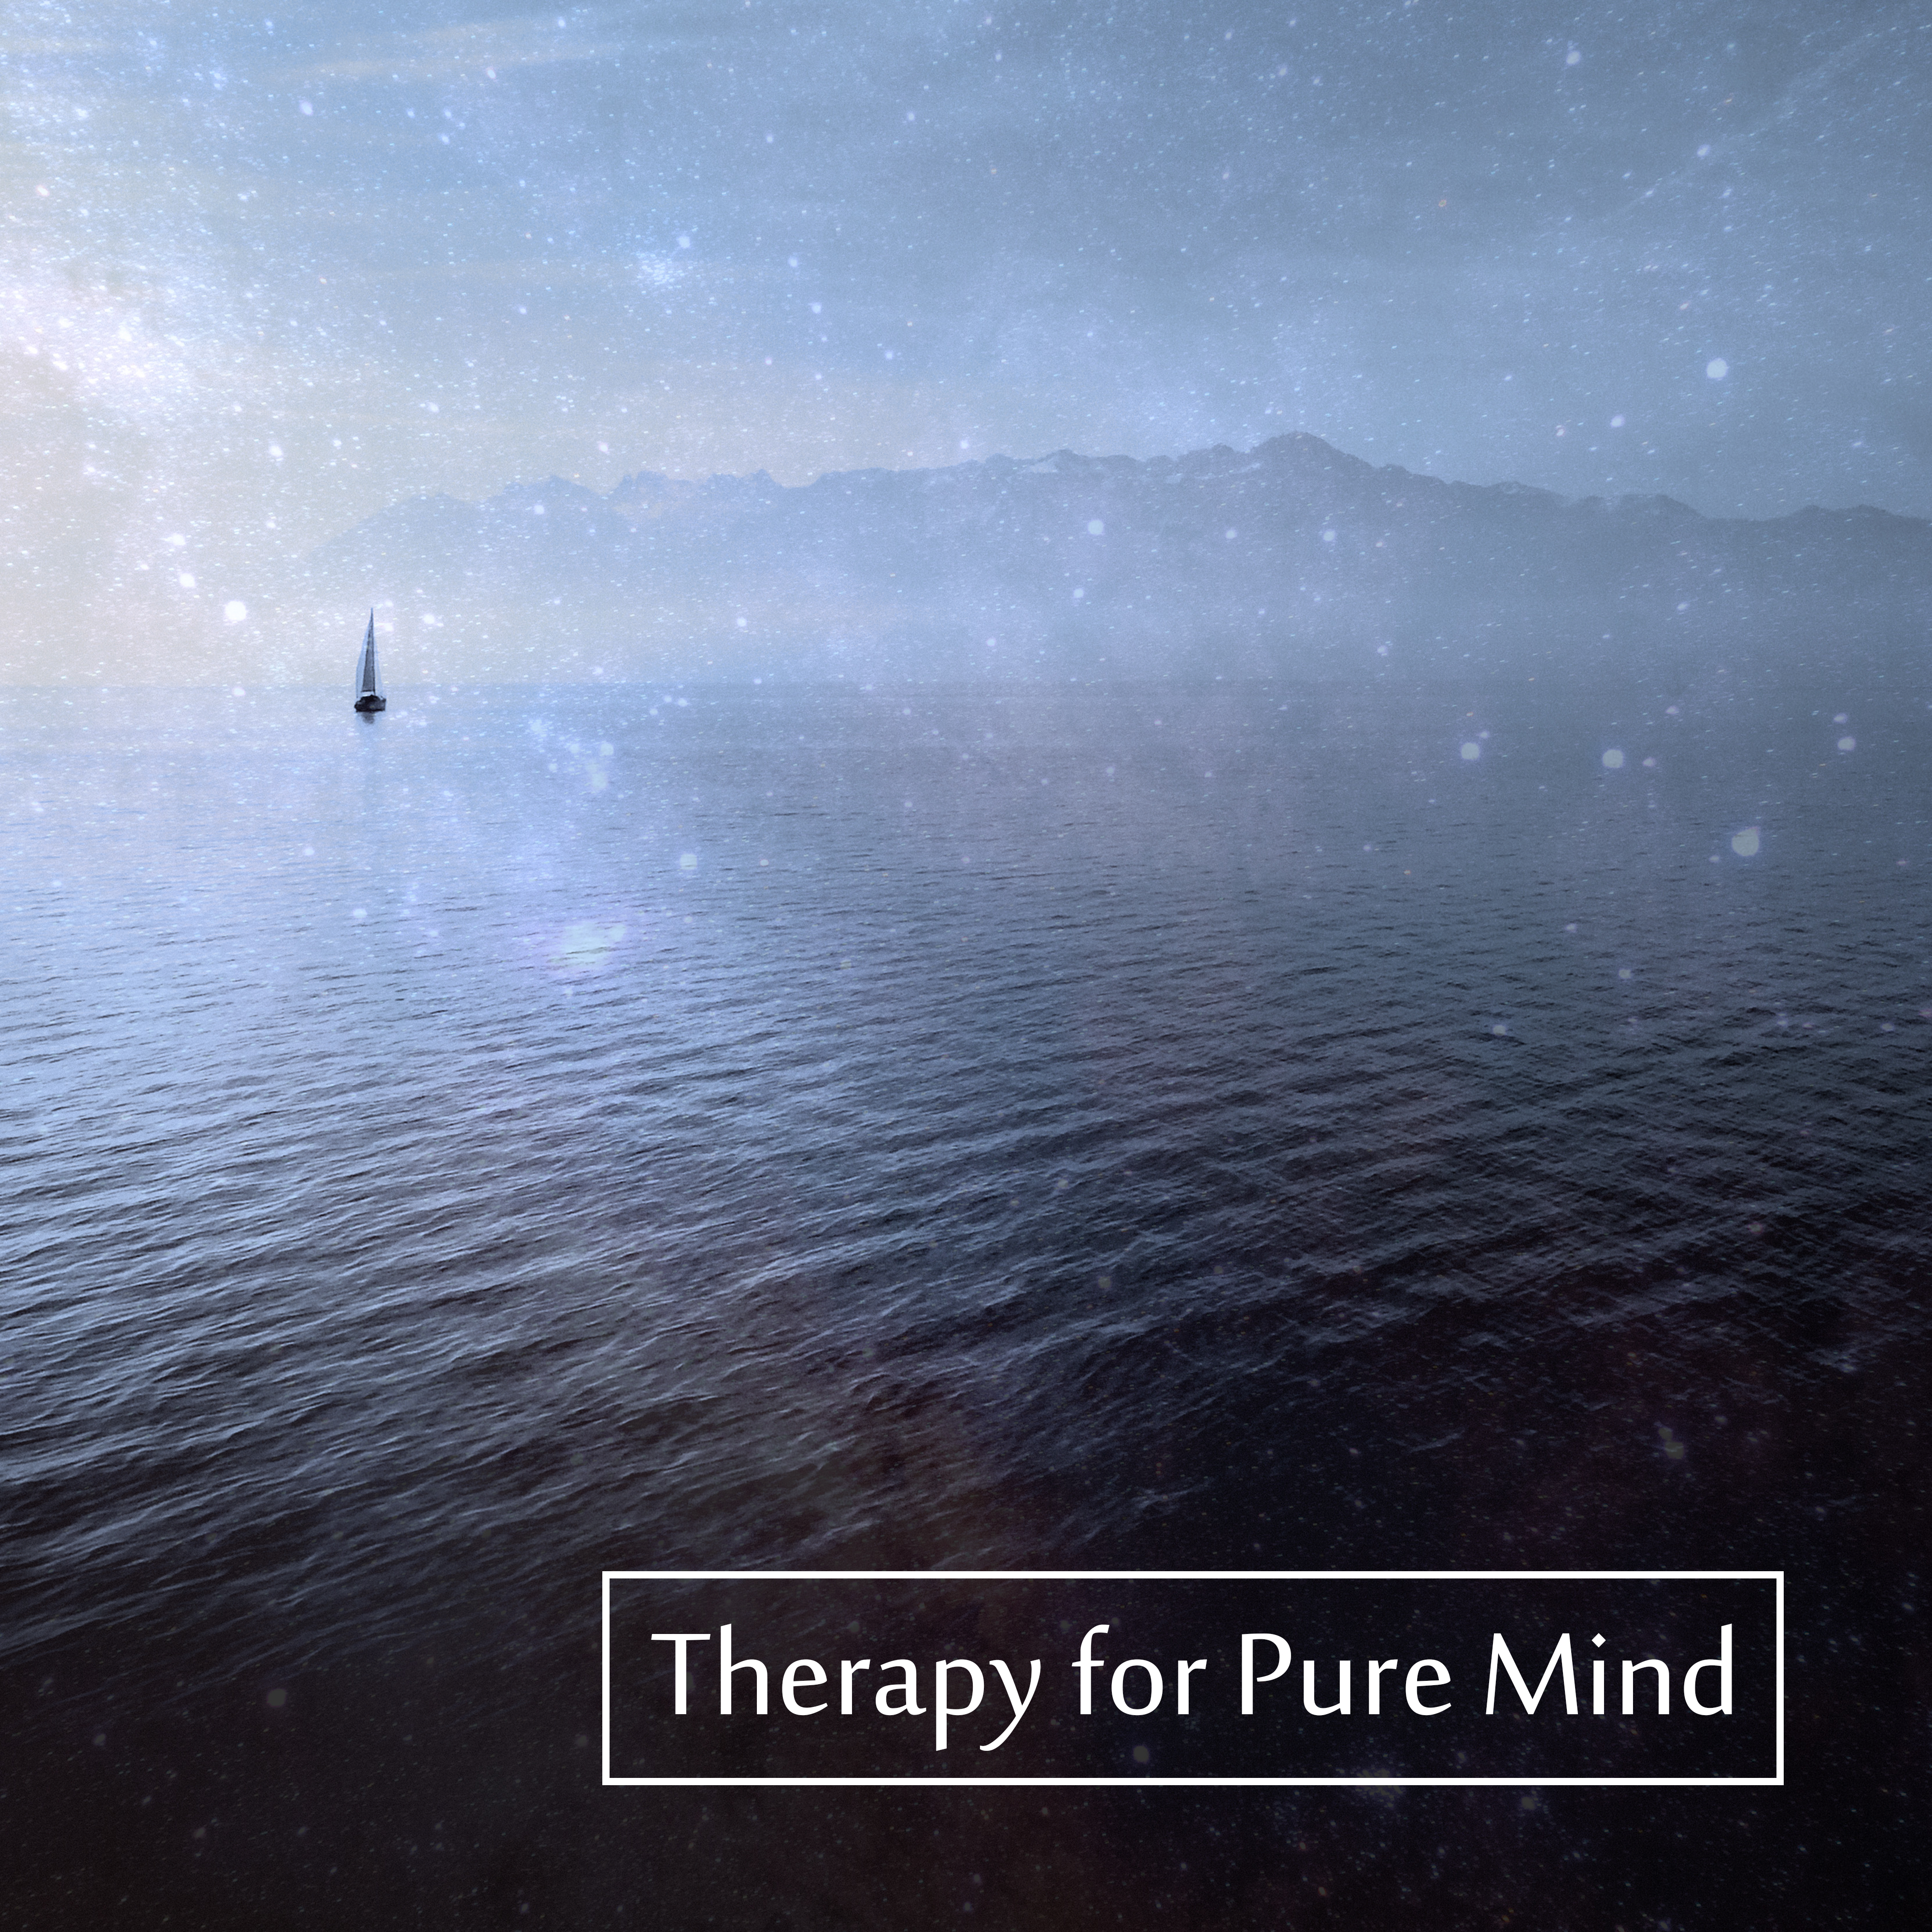 Therapy for Pure Mind – Calming Music for Relaxation, Deep Relief, Zen, Peaceful Sounds, Stress Relief, New Age Music 2017 to Rest